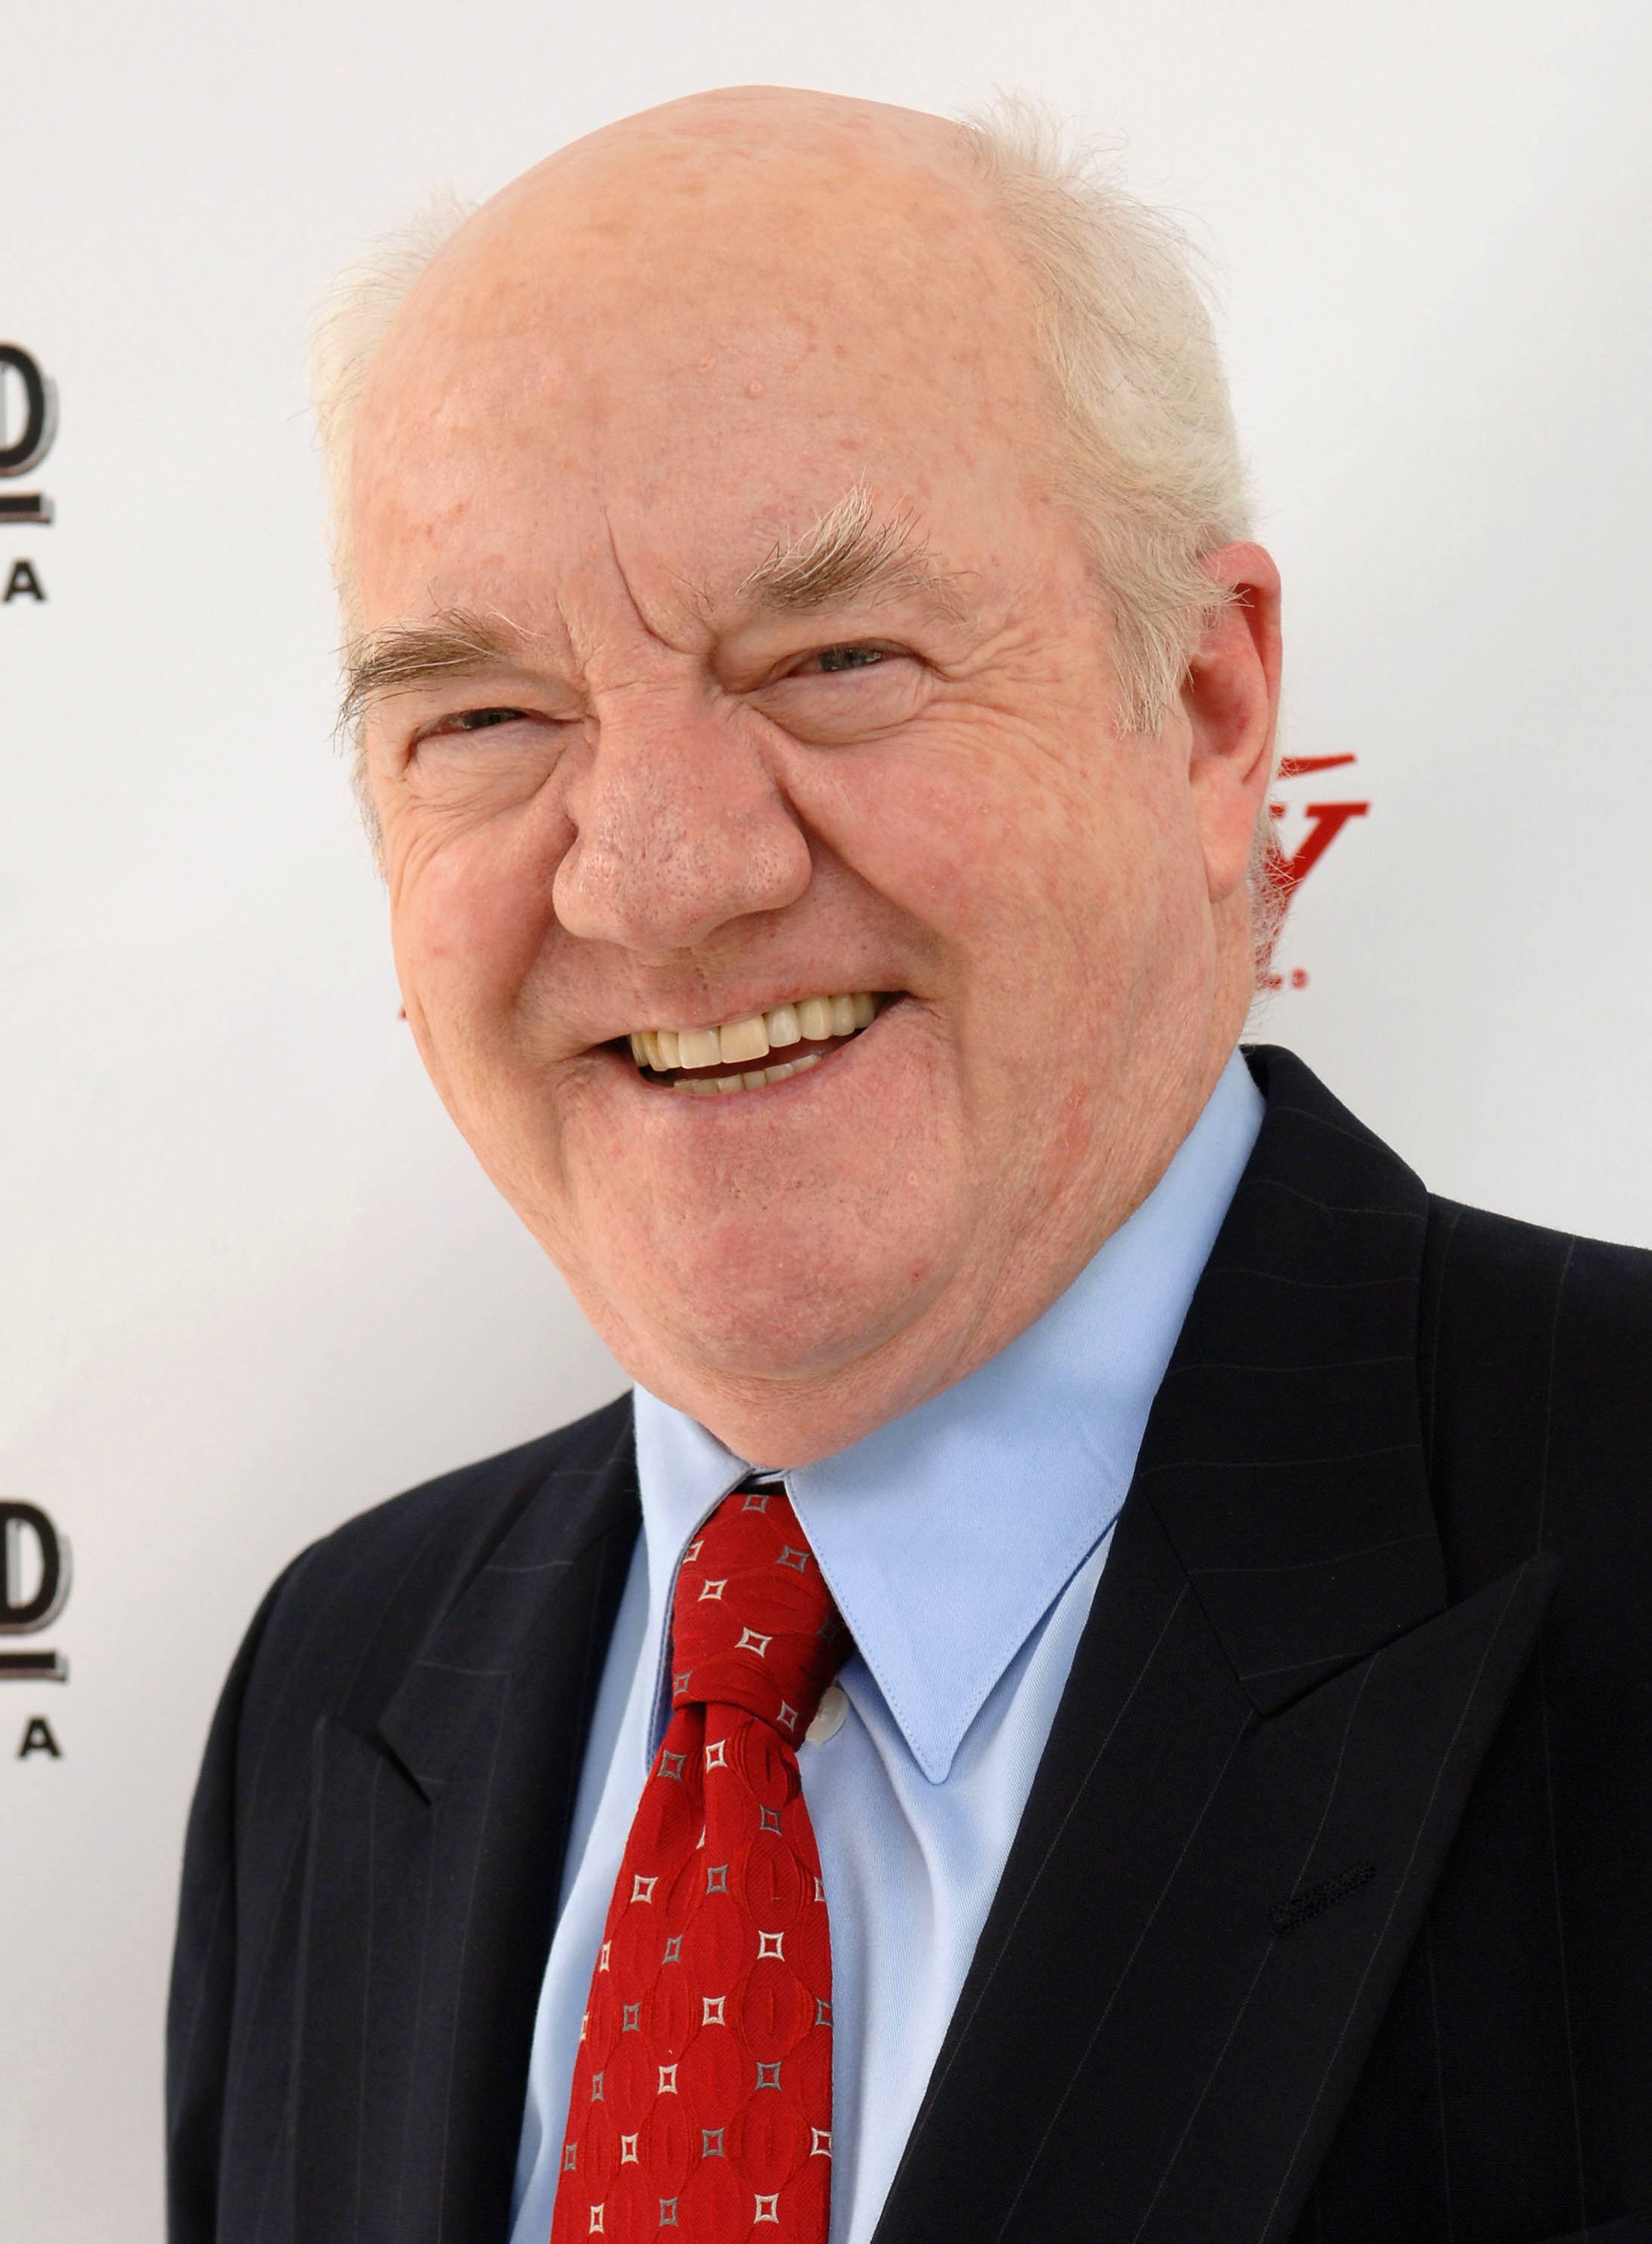 Richard Herd attends The 2005 Tony Awards Party & "The Julie Harris Award", which honored Stockard Channing, at the Skirball Center on June 5, 2005, in Los Angeles, California. | Source: Getty Images.